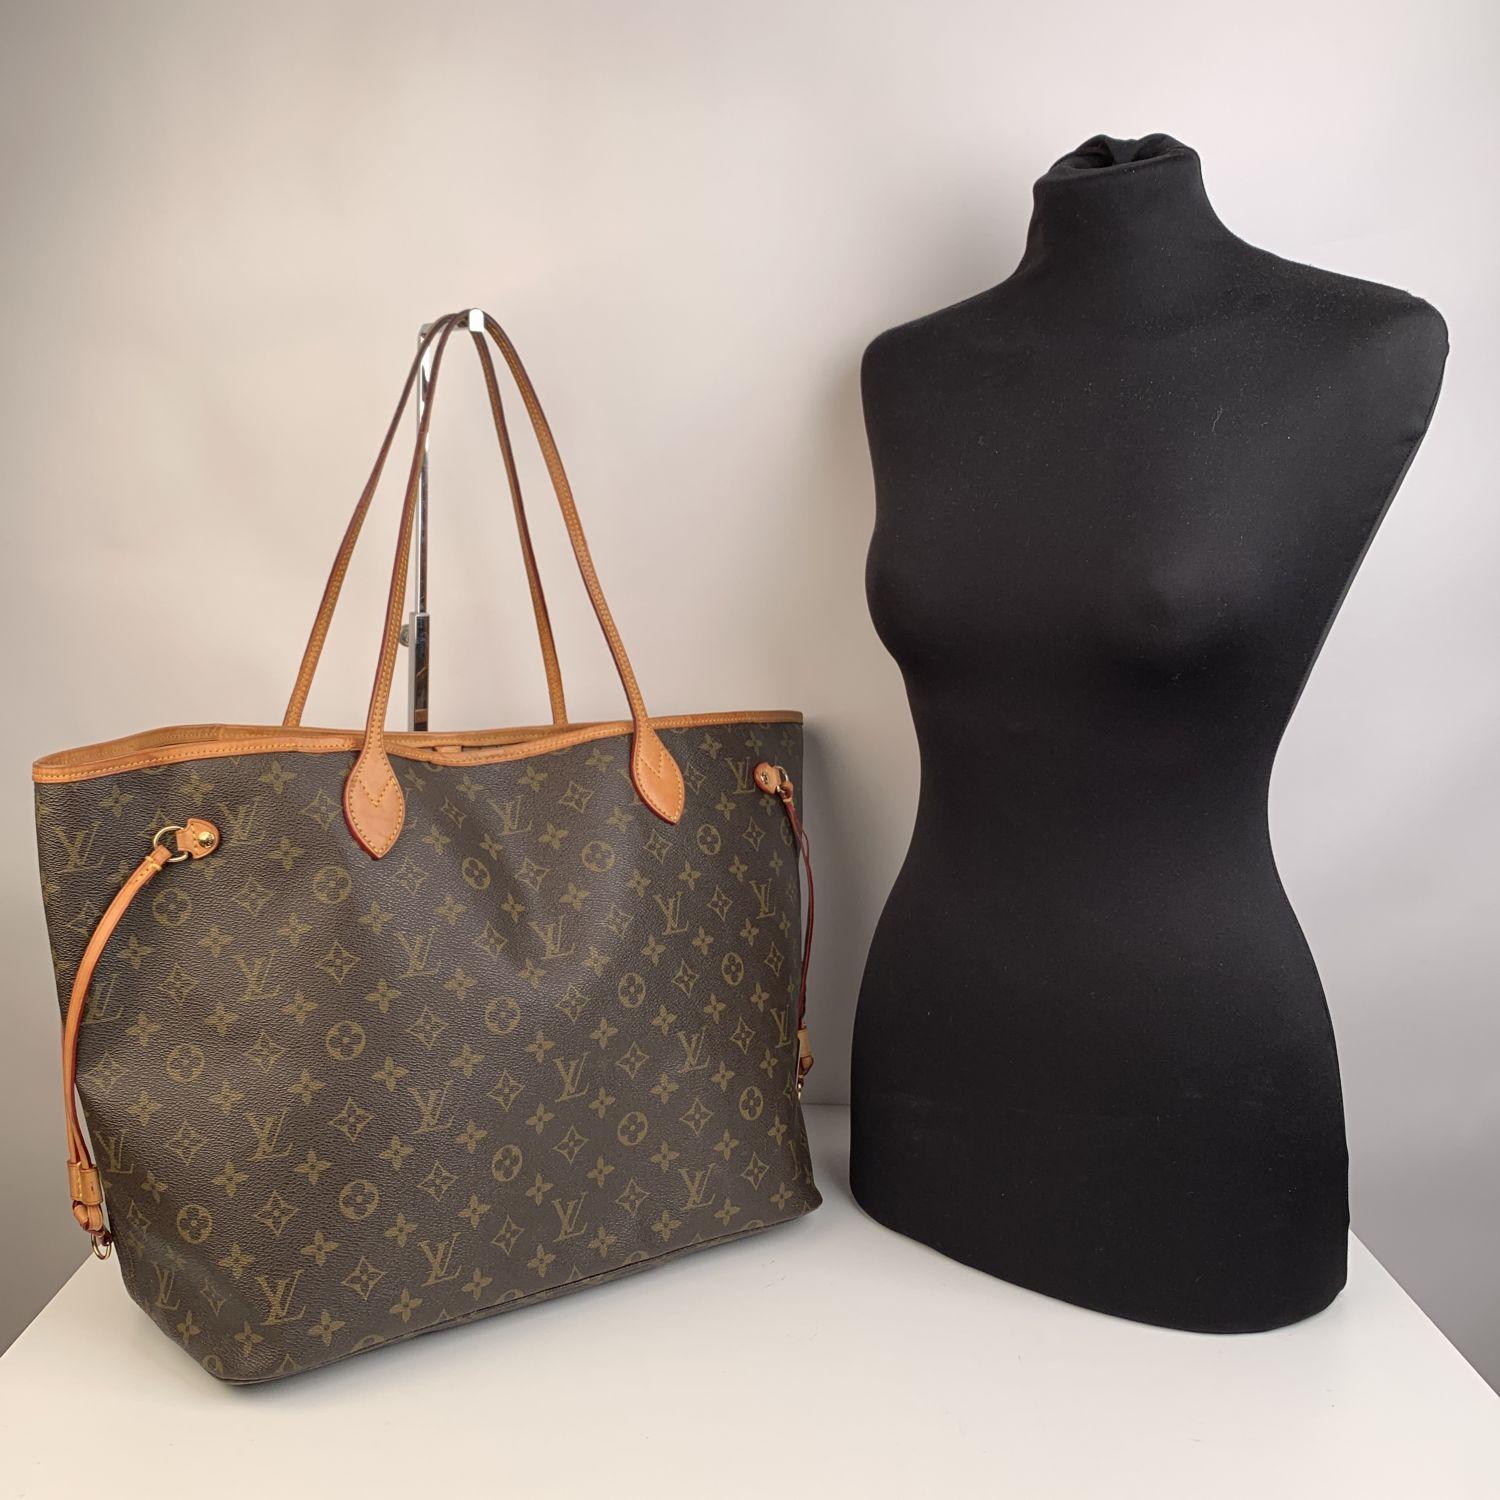 Louis Vuitton Neverfull GM Tote Bag. Monogram canvas with leather trim and handles. Redesigned interior with Louis Vuitton archive details. Open top. Fabric lining with 1 side zip pocket and D-ring inside. Golden color metallic pieces. 'LOUIS